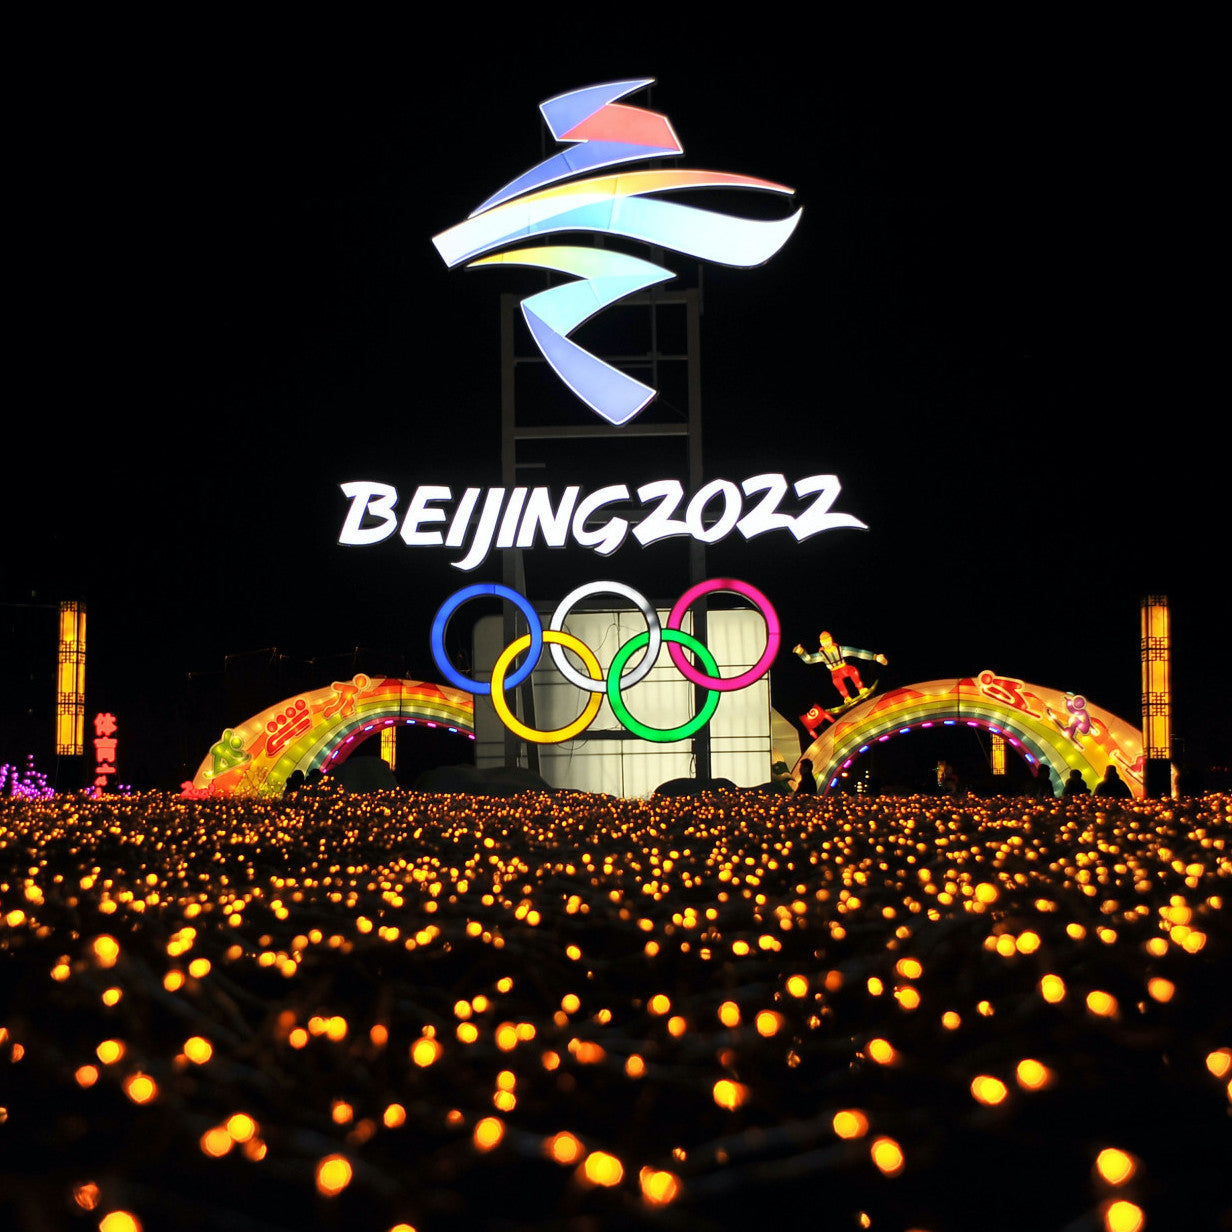 6 Months to go until the Beijing 2022 Winter Olympics...